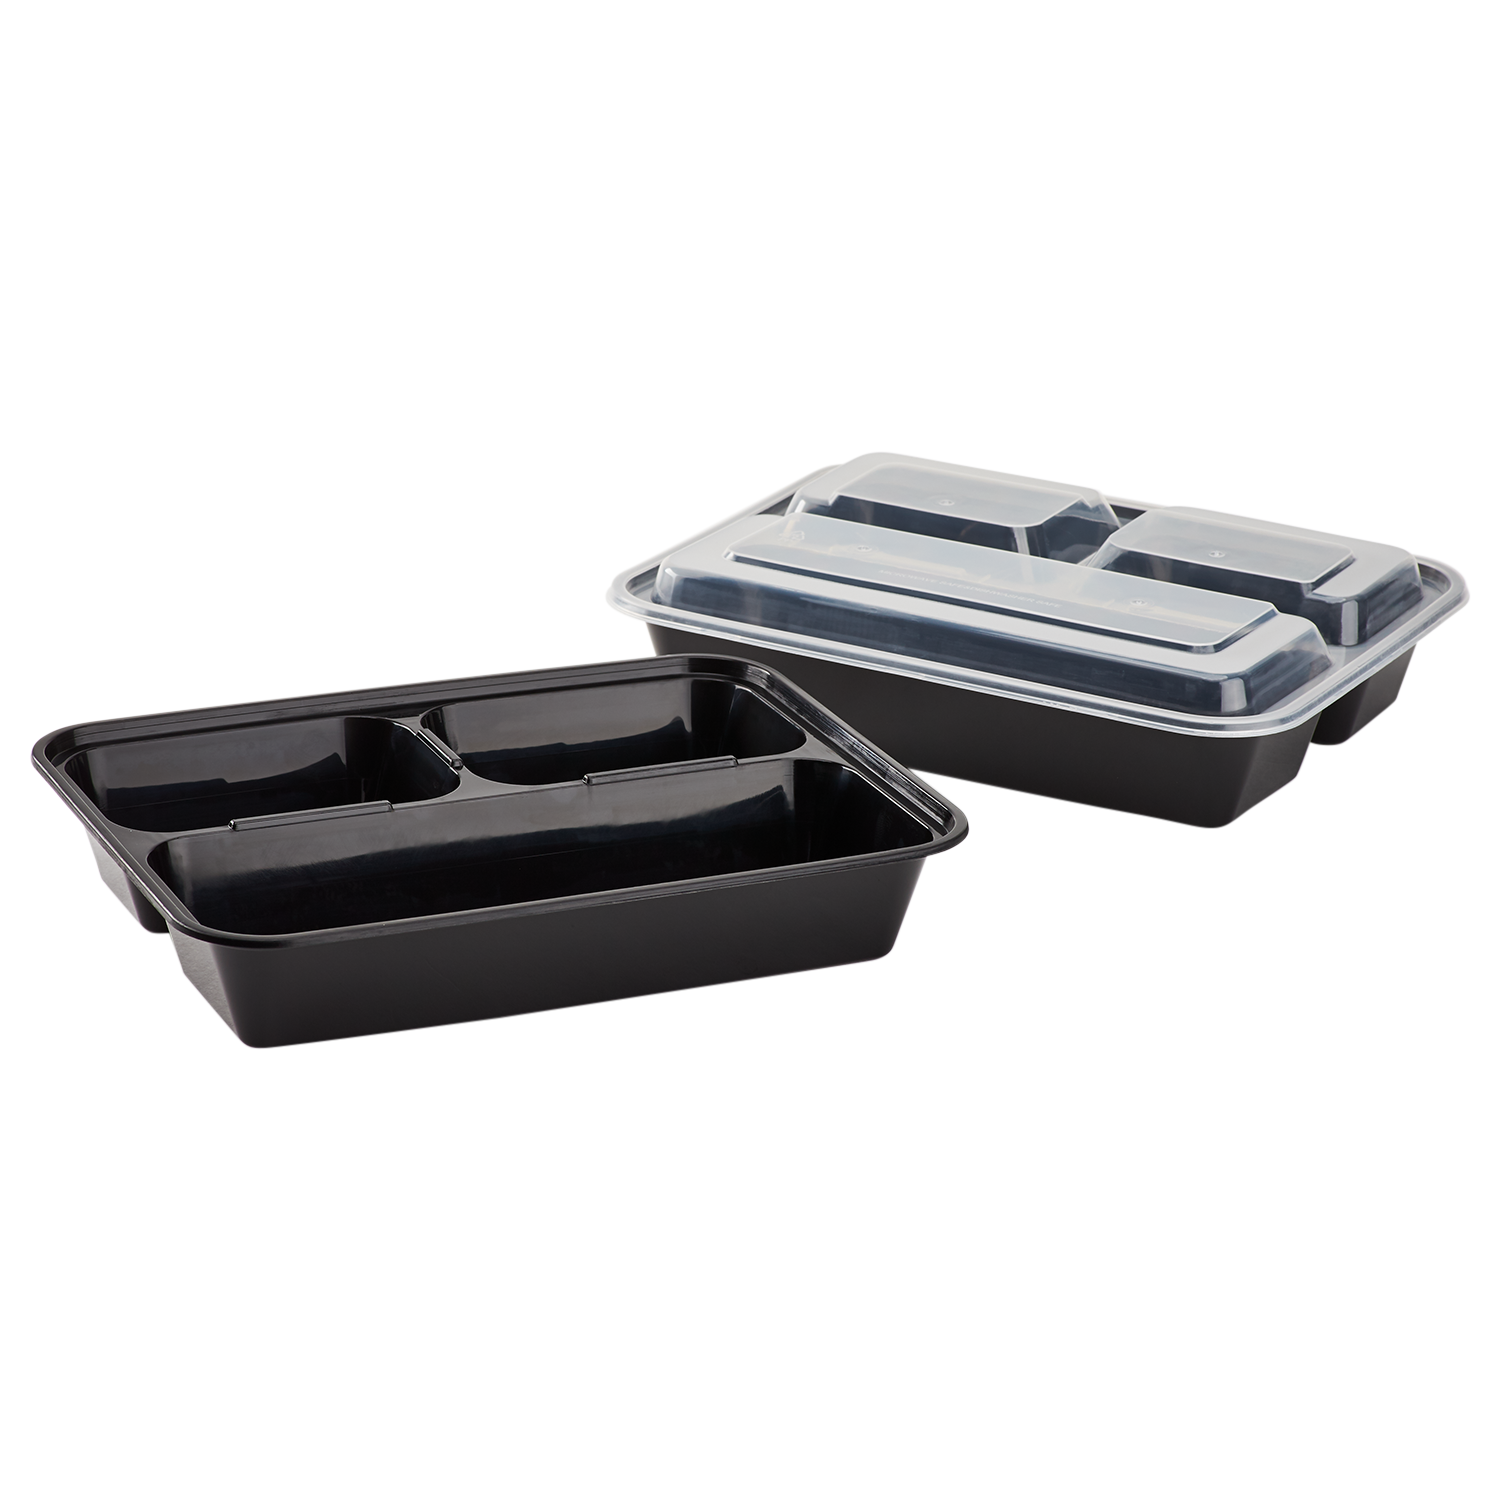 Are To-Go Containers Microwavable?